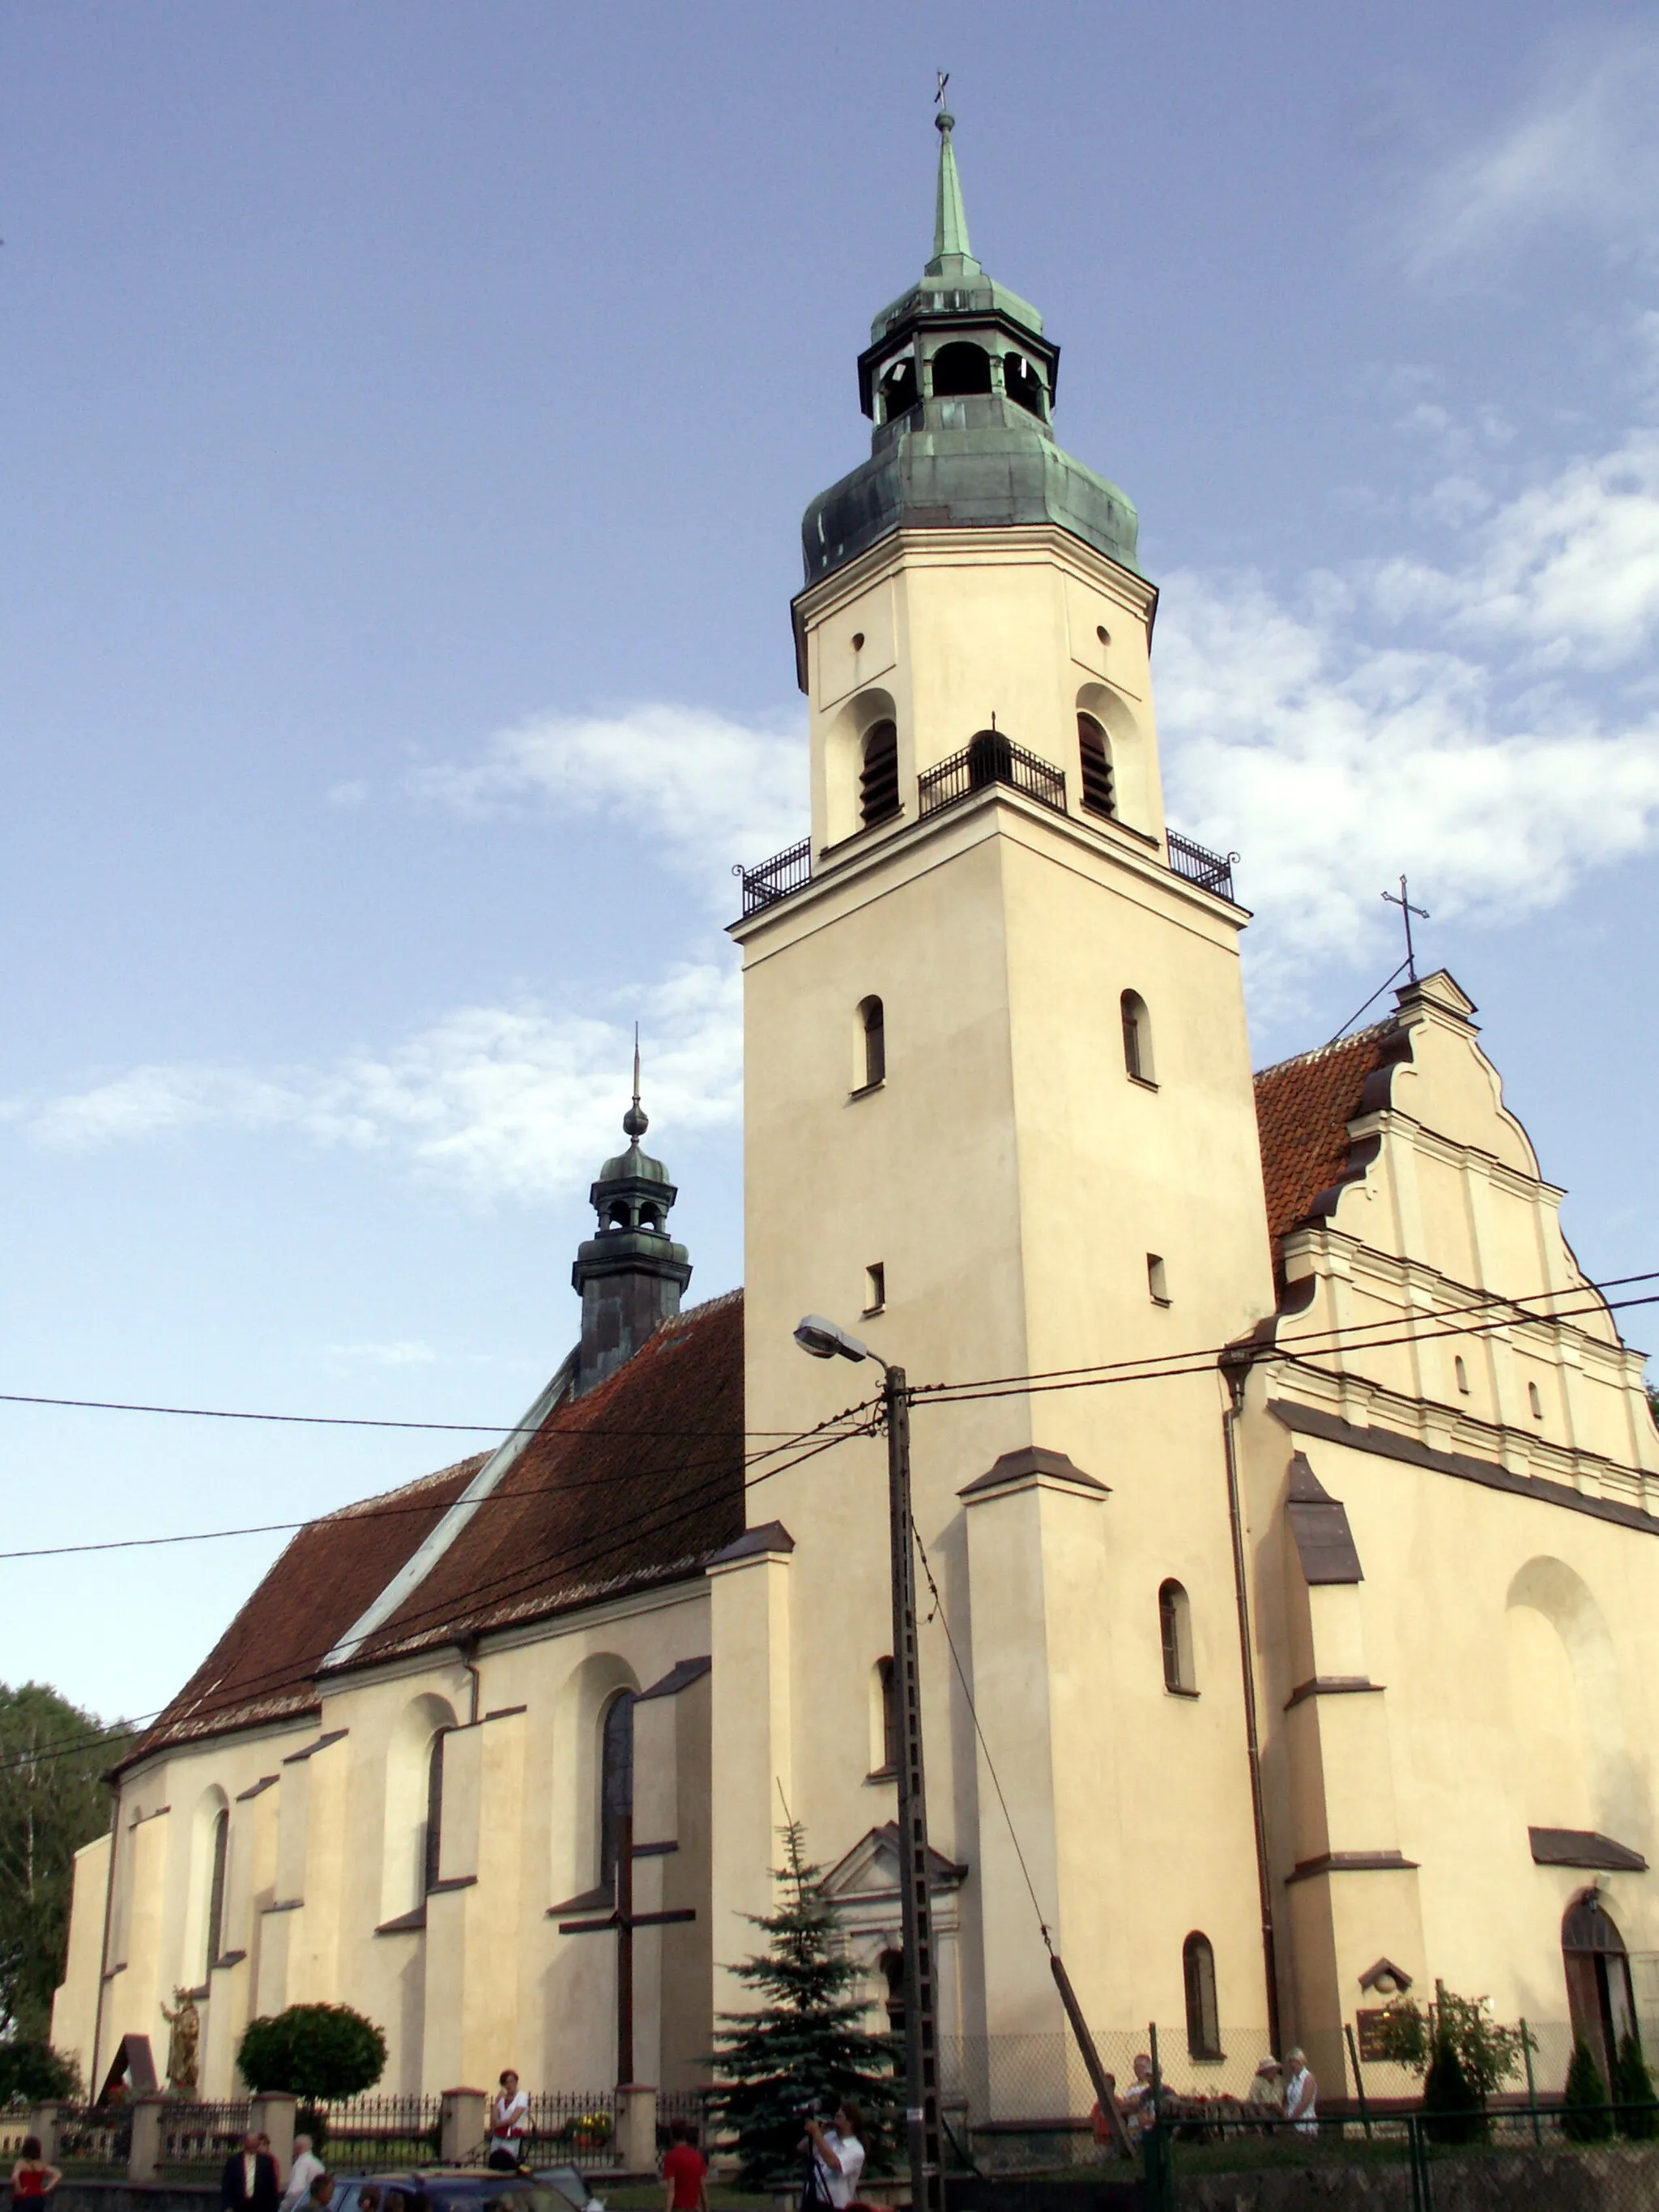 Photo showing: Saints John the Baptist and Michael Archangel church in Lubawa, Poland